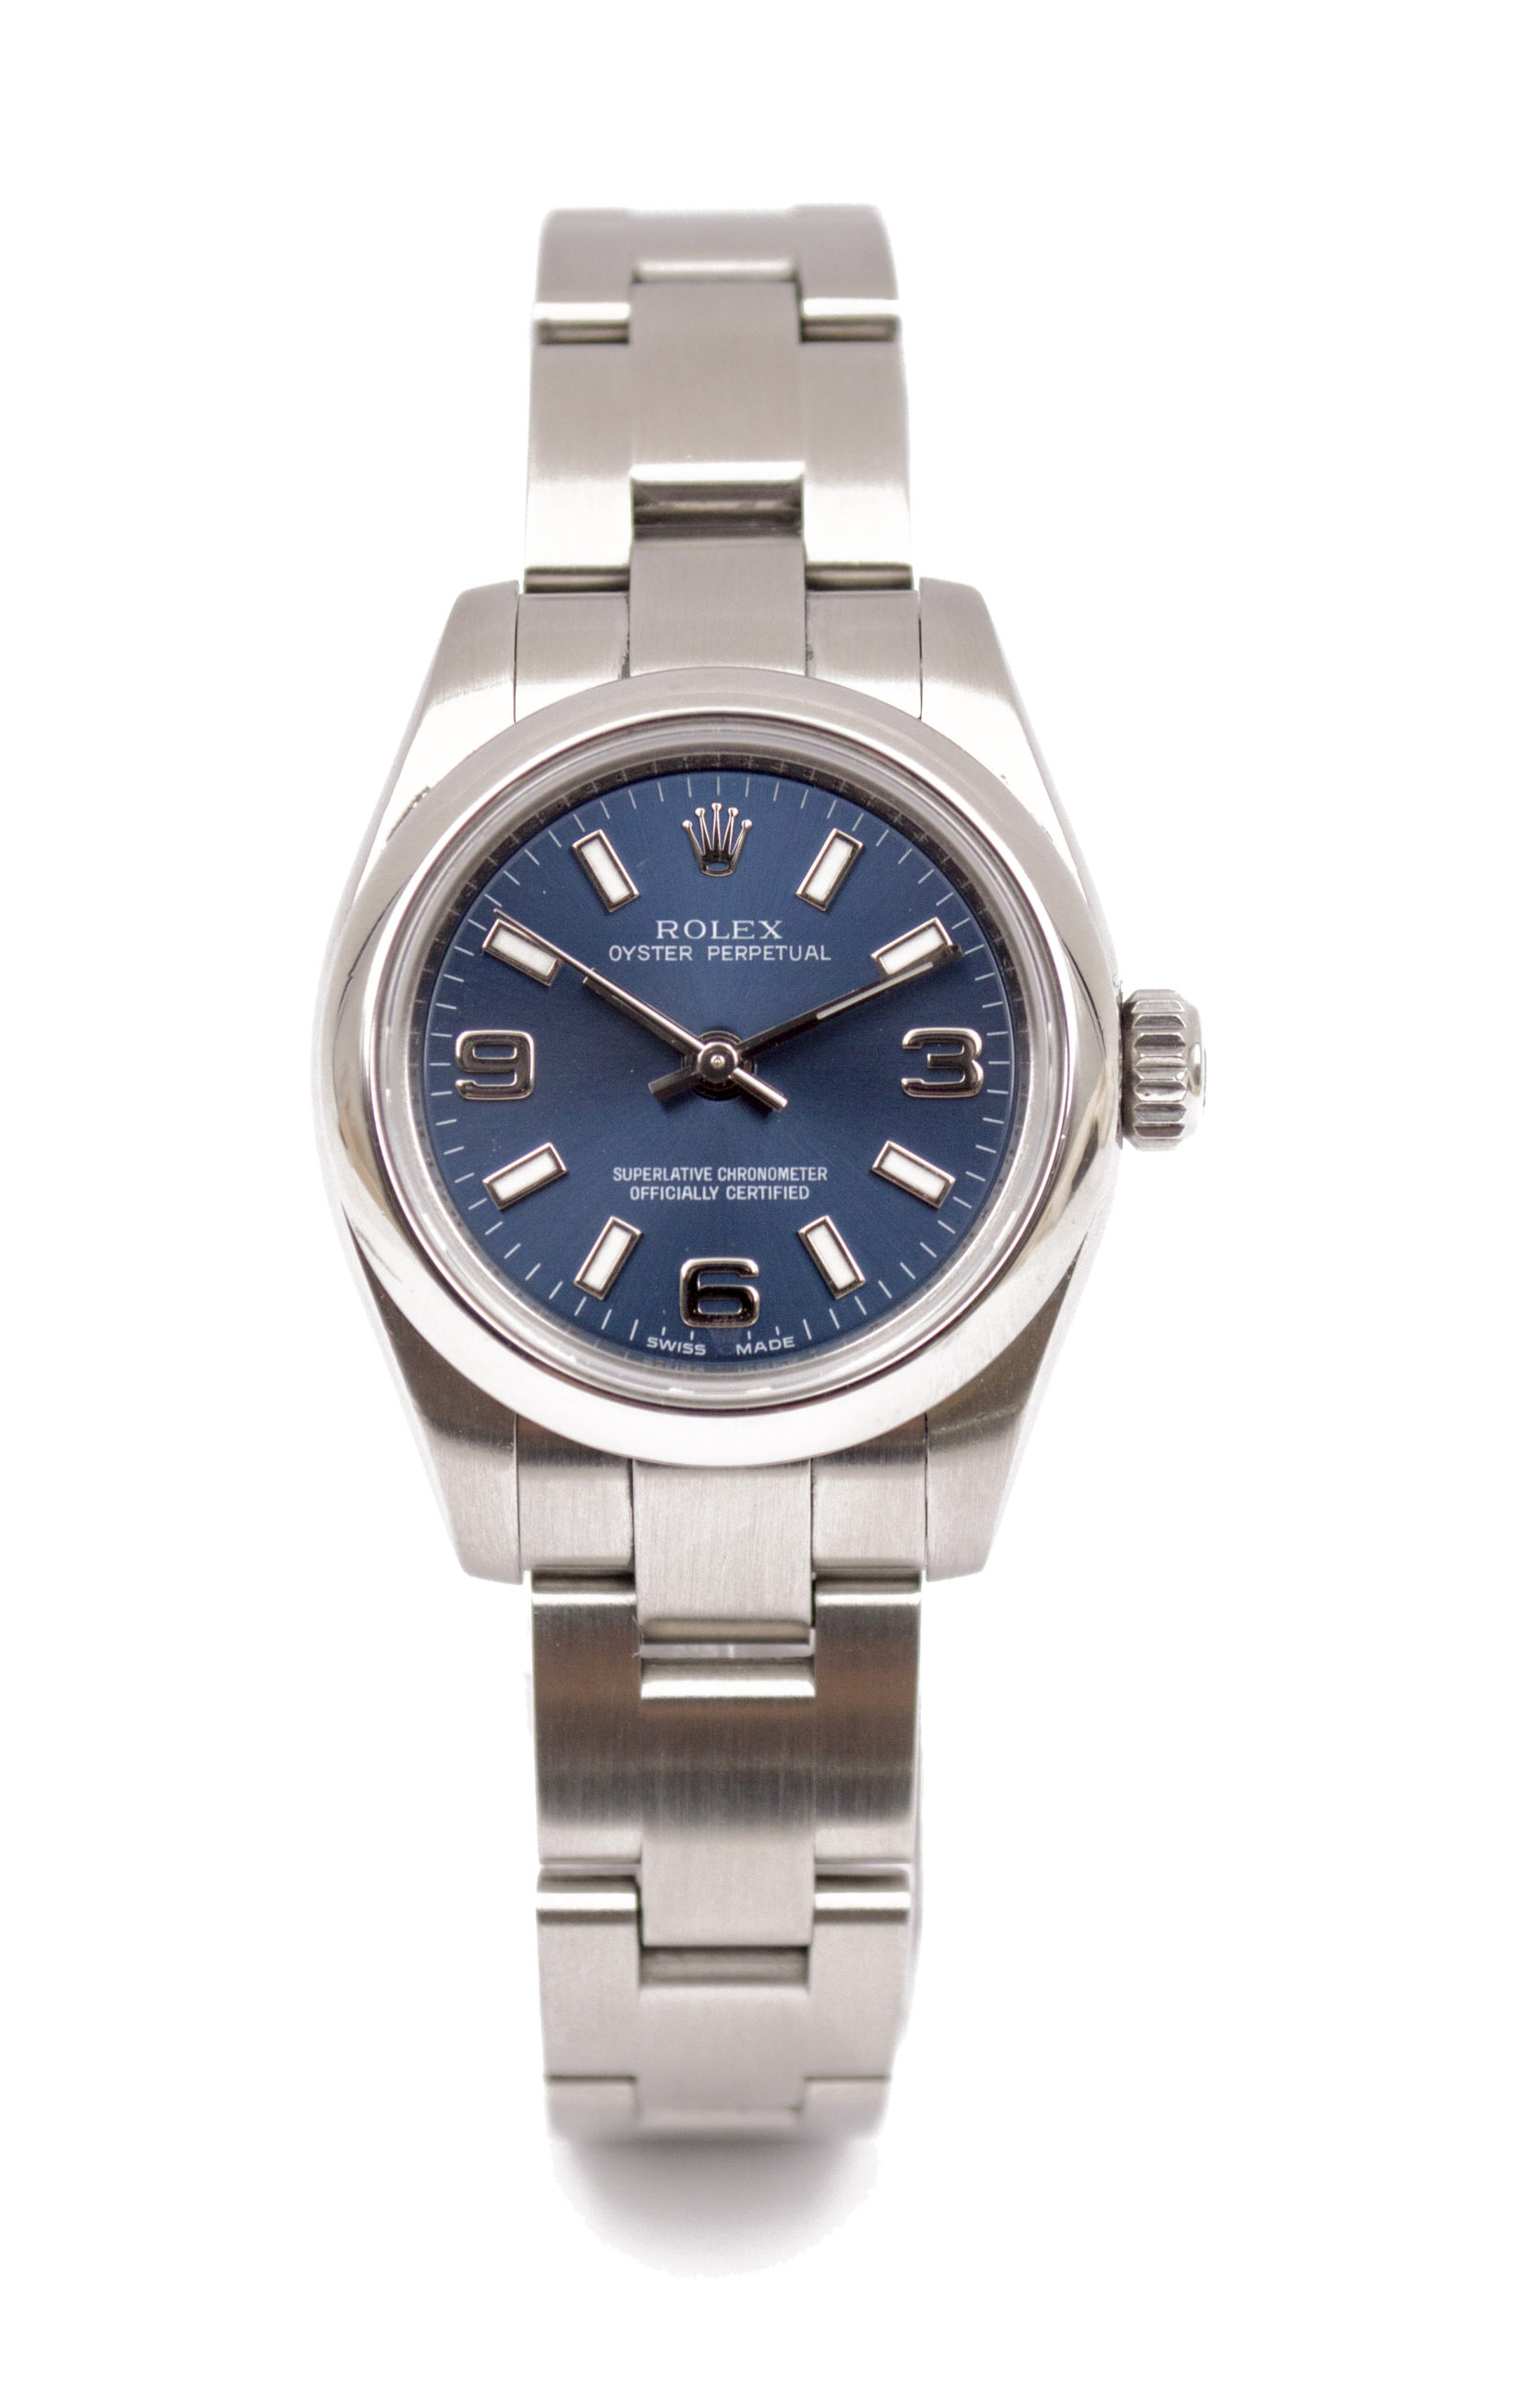 2007 rolex oyster perpetual datejust